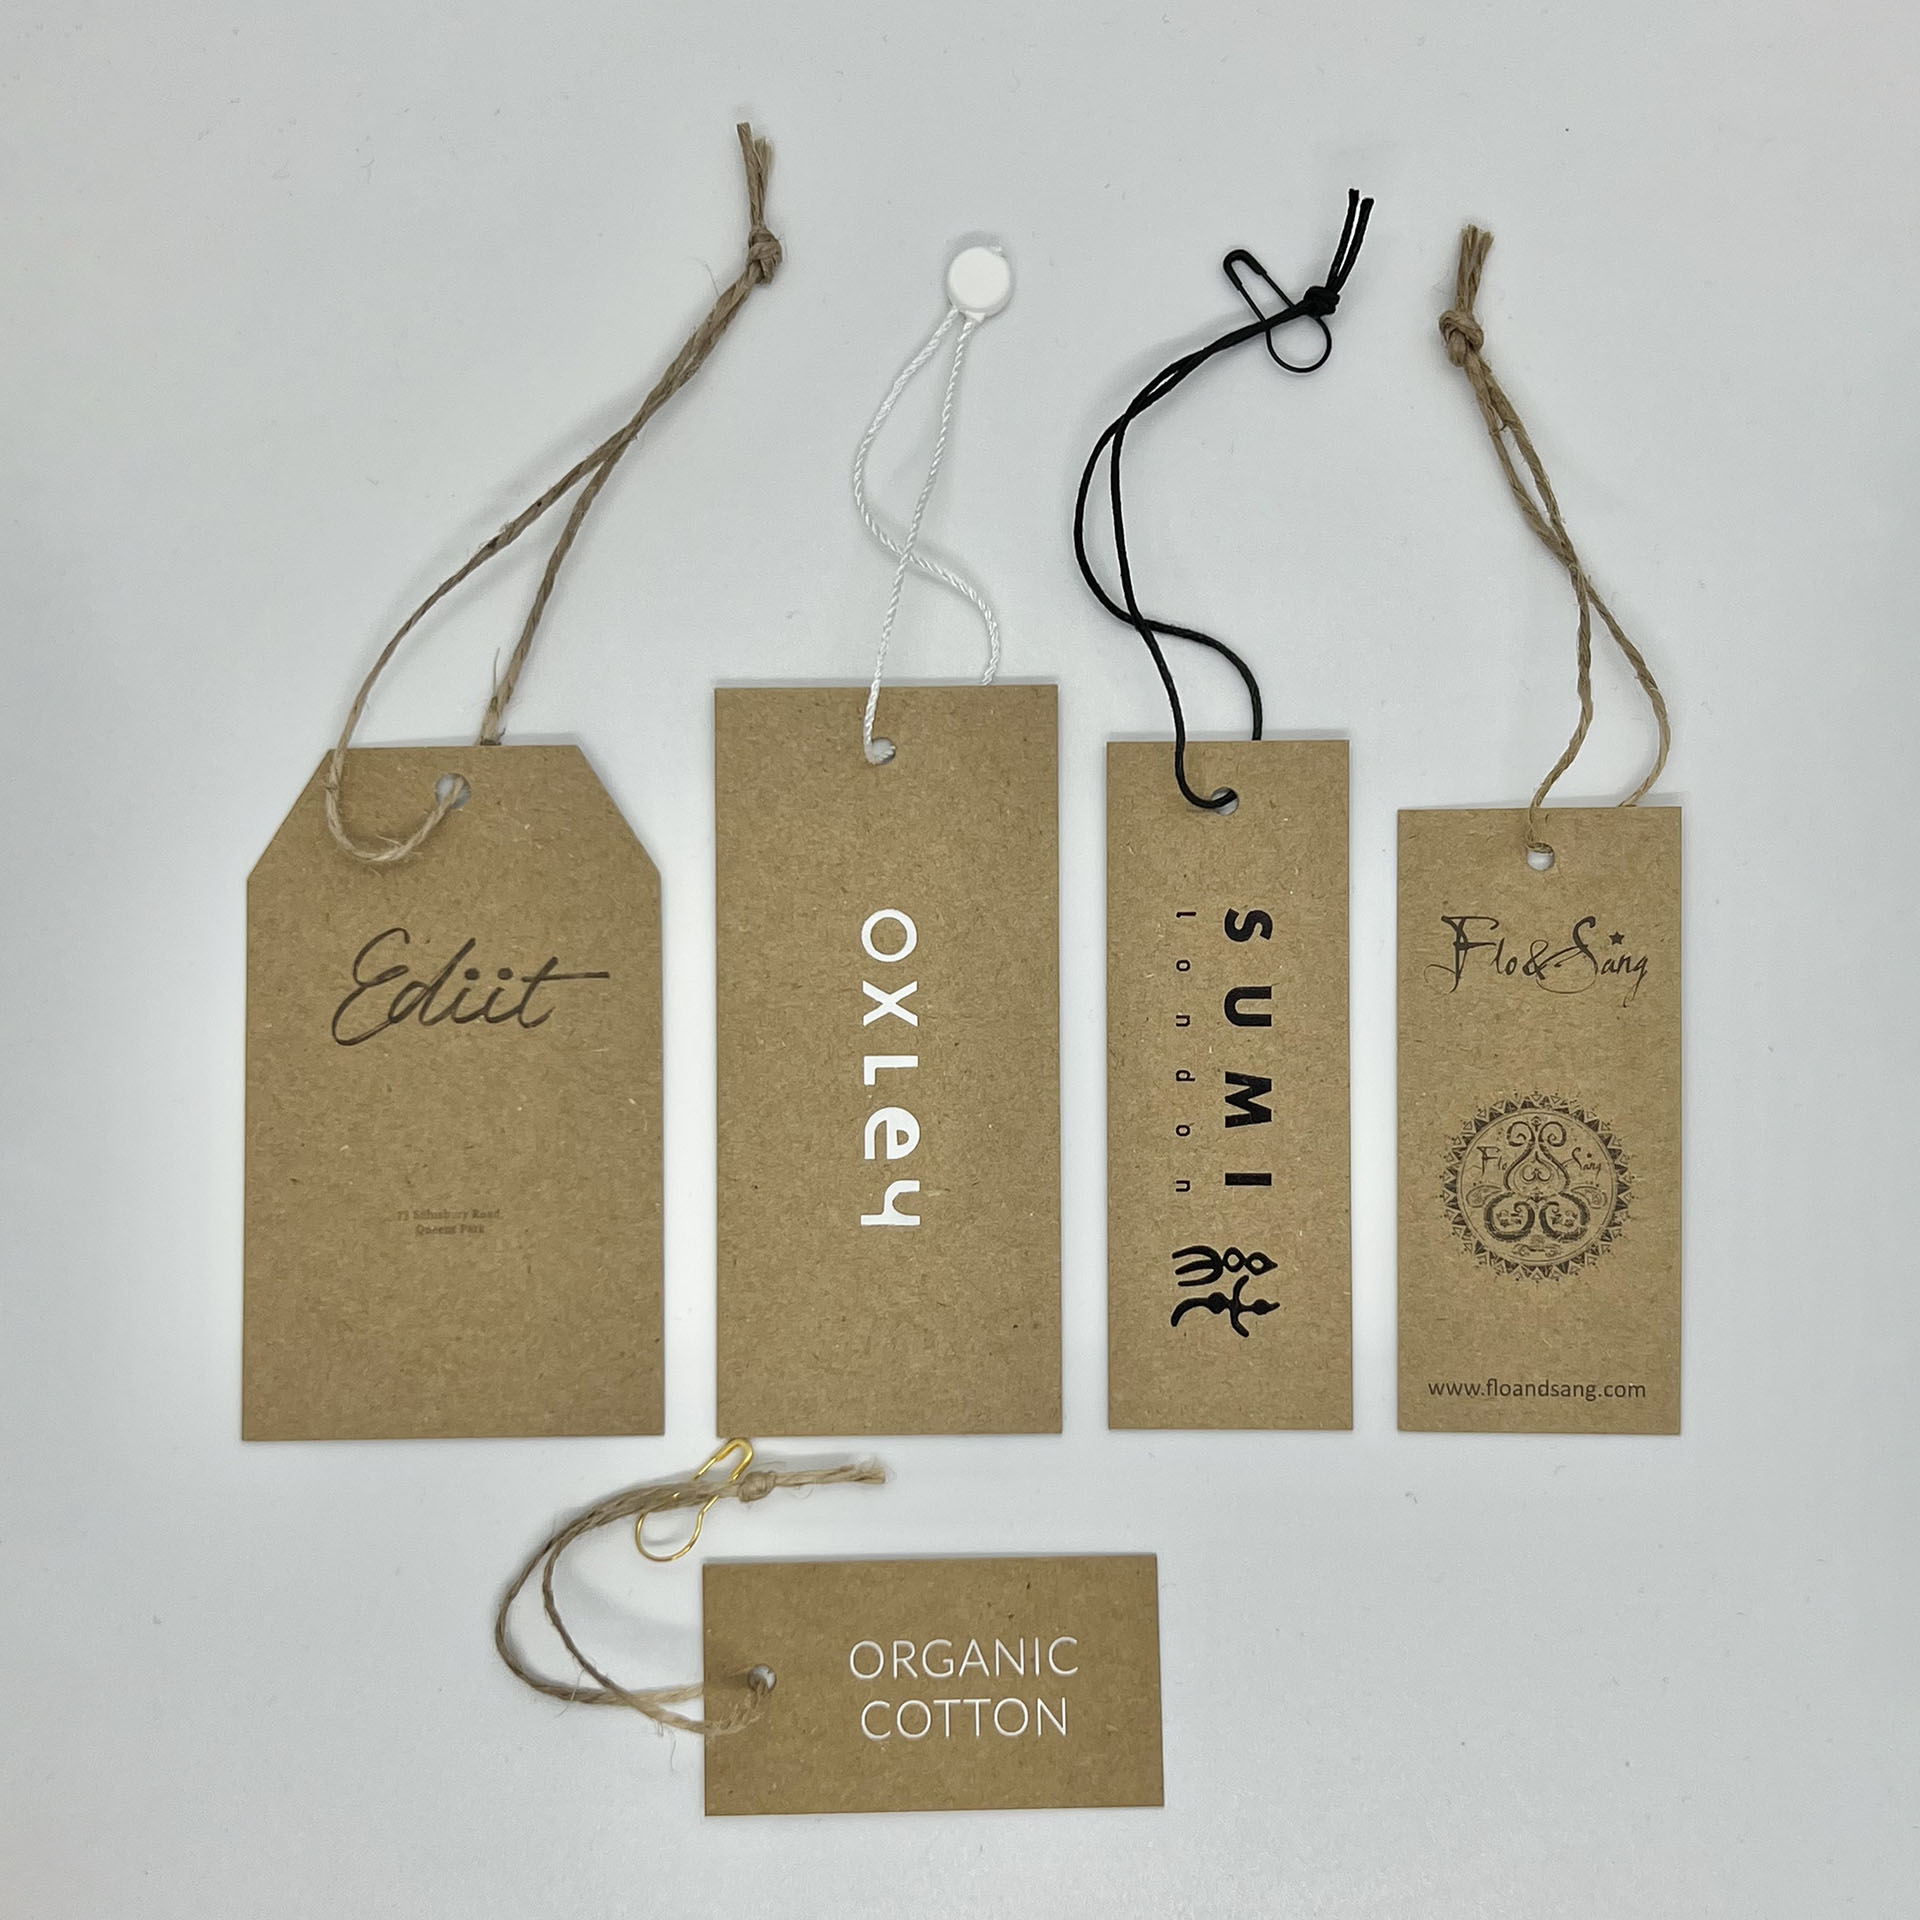 Go eco: Guilt-free packaging ideas for sustainable brands | Hallmark ...